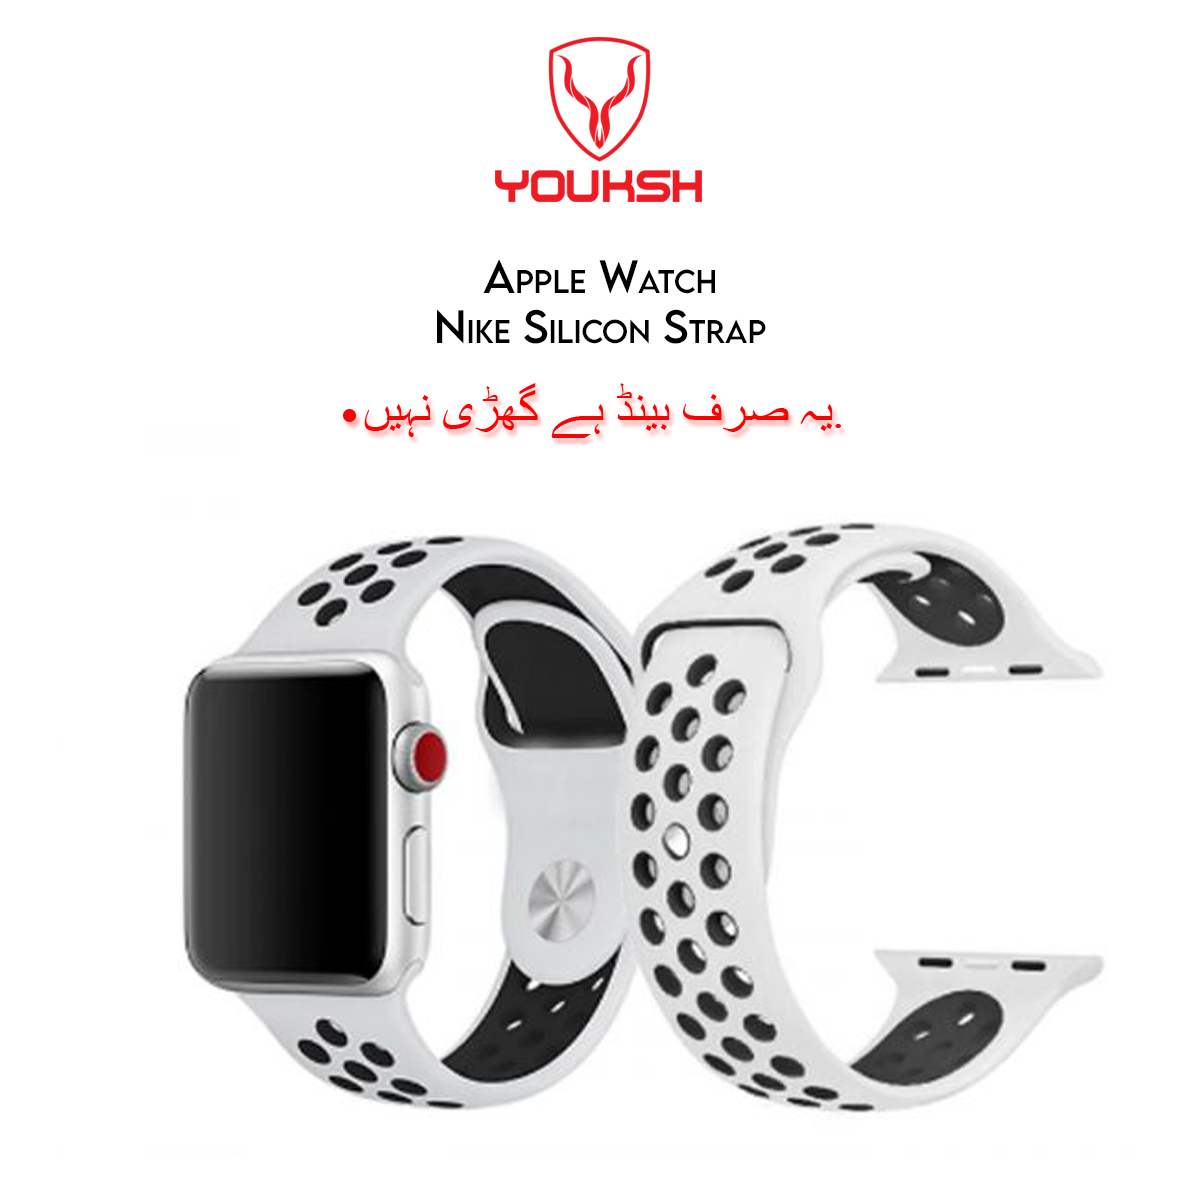 YOUKSH - Apple Watch 38mm/40mm Sports Silicone Strap - 38mm/40mm Sports Silicone Band Strap - For Apple Watch Series - 1/2/3/4/5/6.